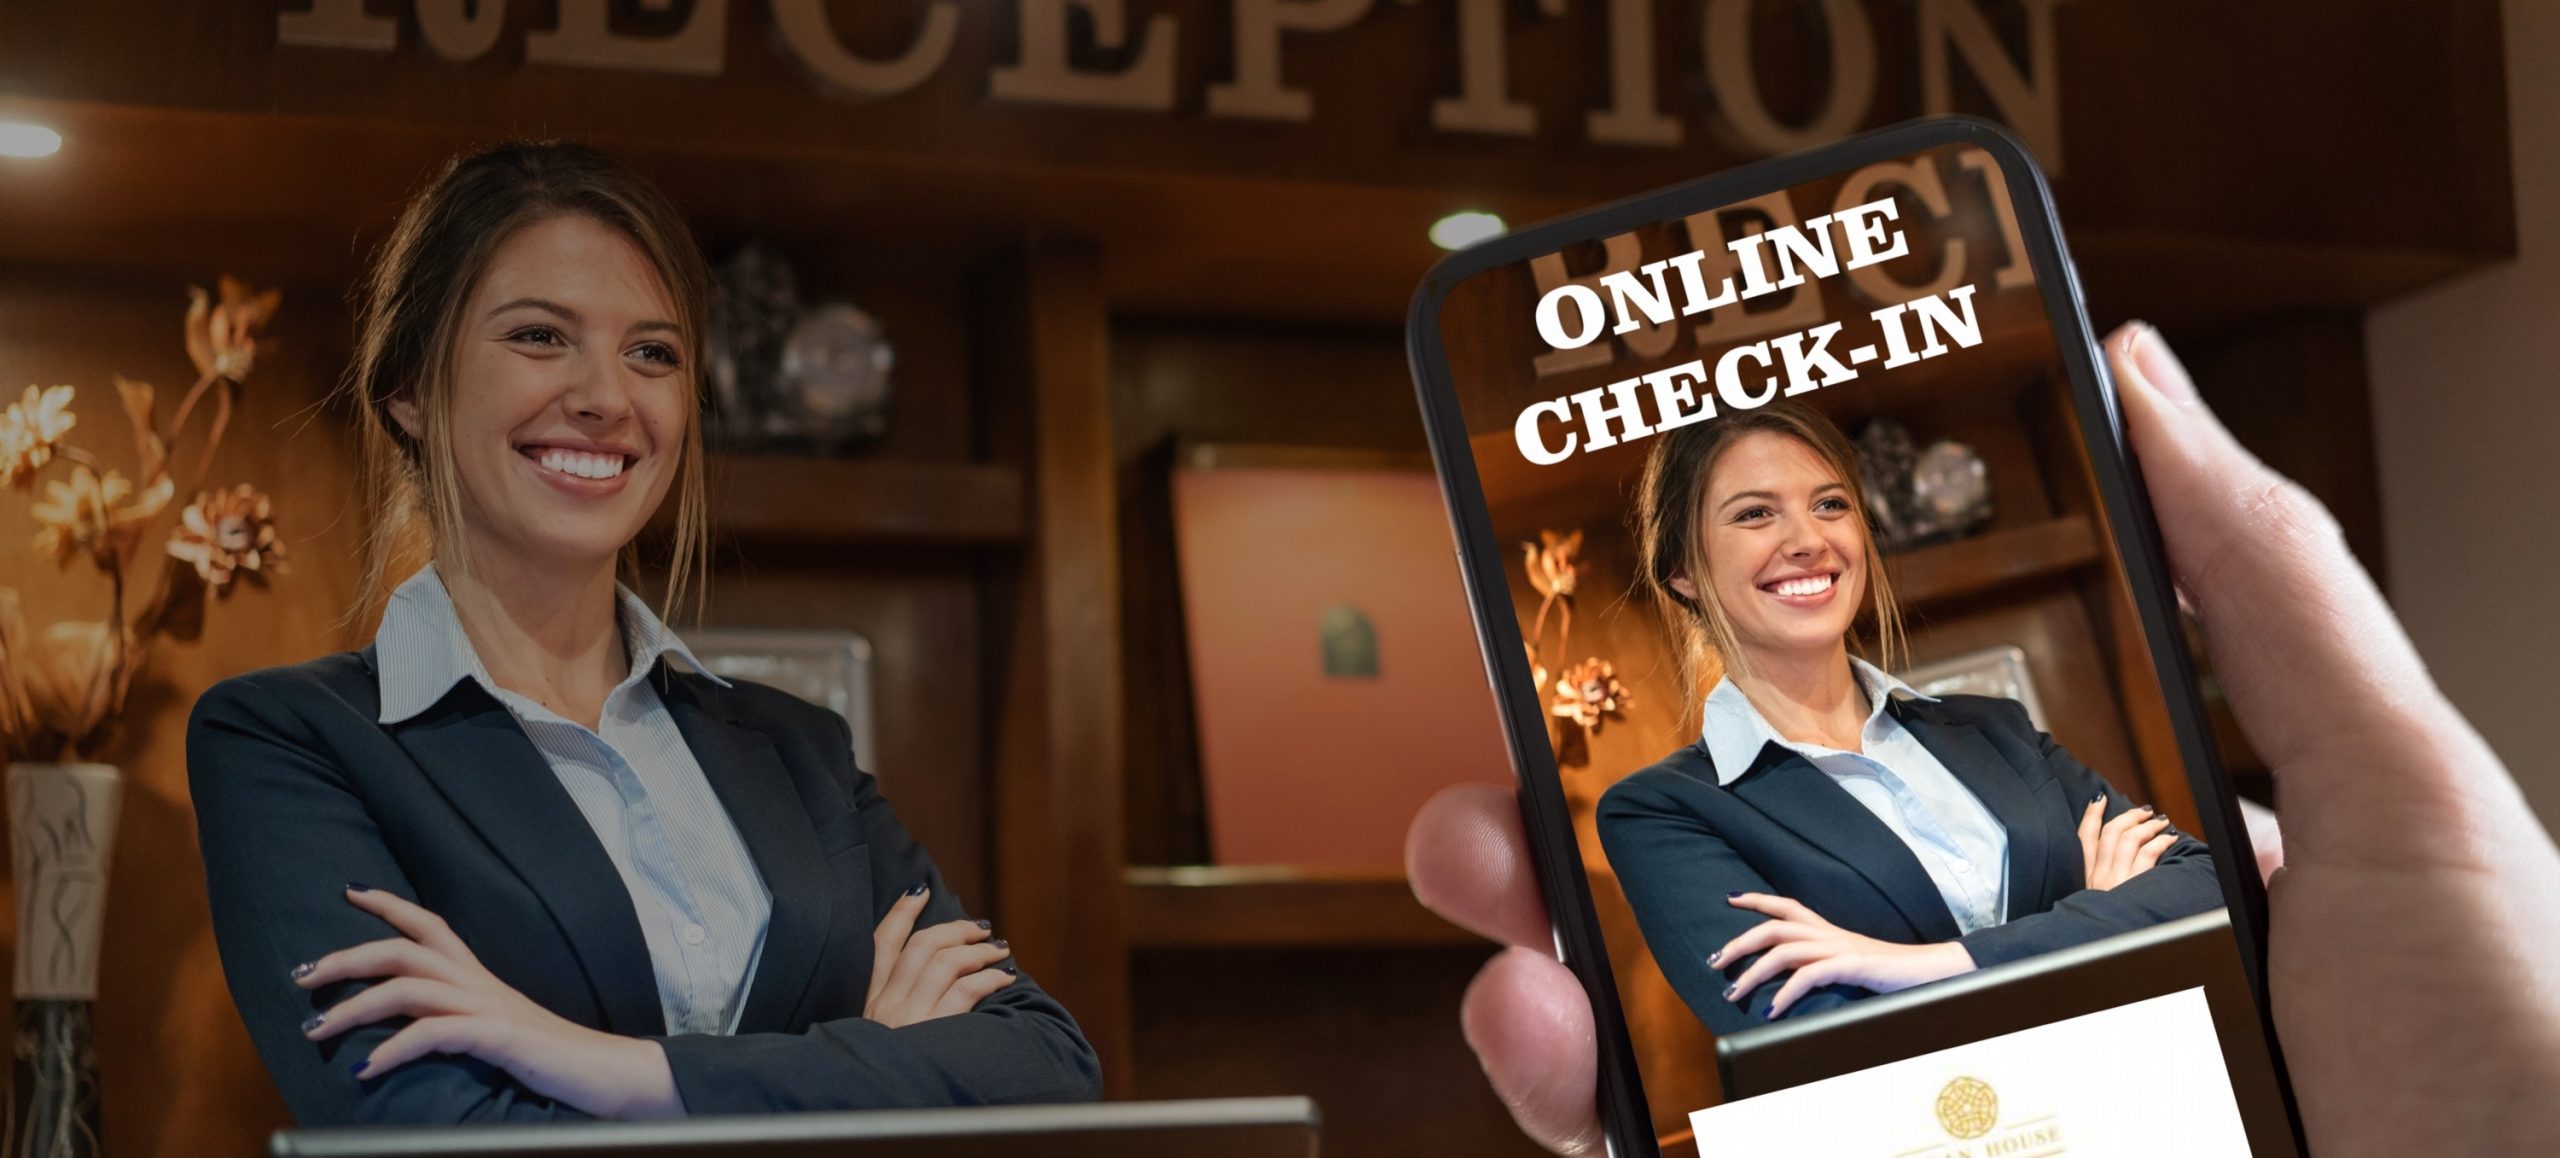 HOSPITALITY ONLINE CHECK-IN APP